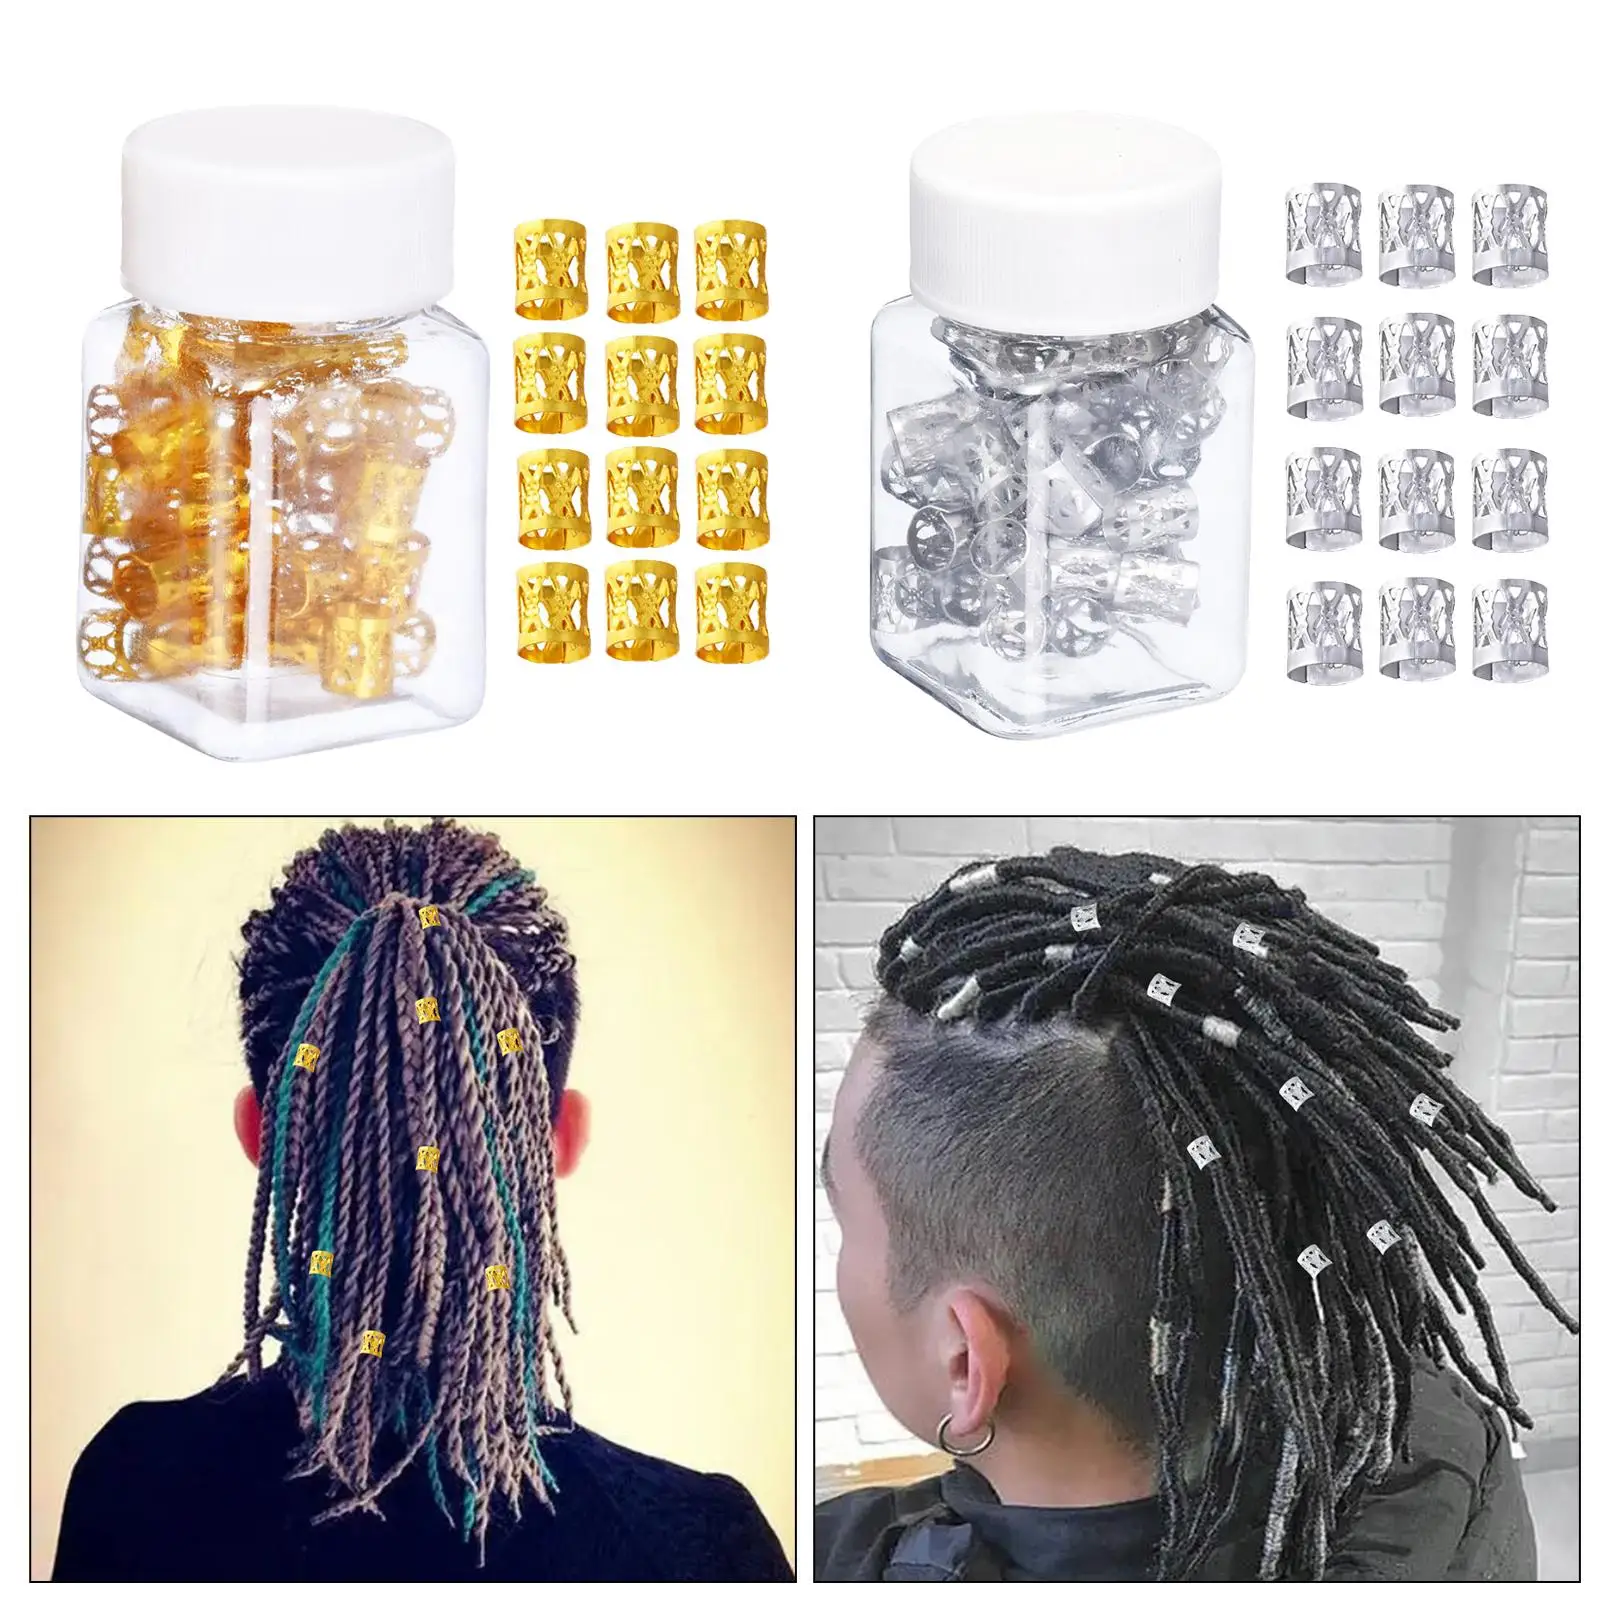 100 Pieces Dreadlocks Beads Hair Braiding Beads Cuffs Hair Jewelry Rings for Hair Accessory Necklace Jewelry Unisex Men Women